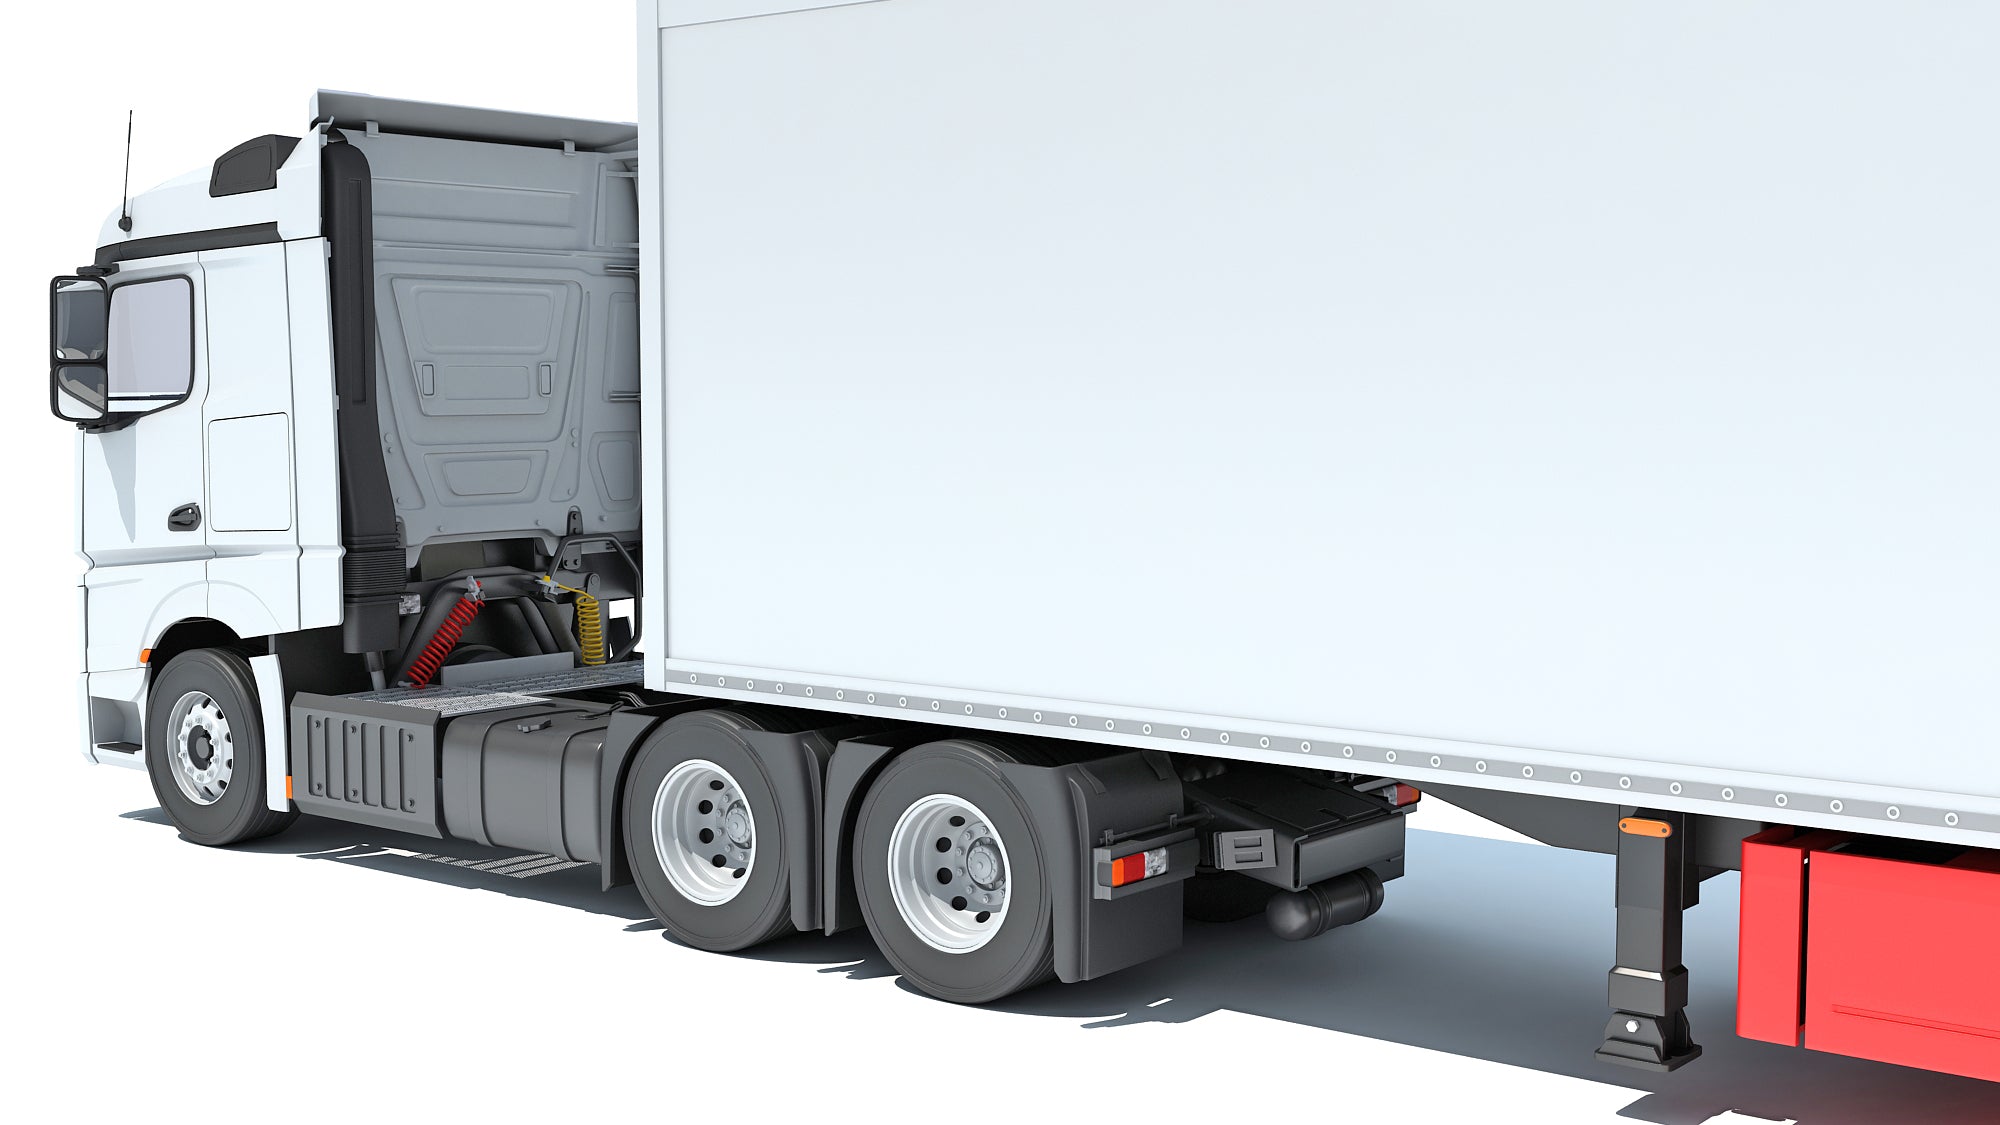 Truck with Reefer Refrigerator Trailer